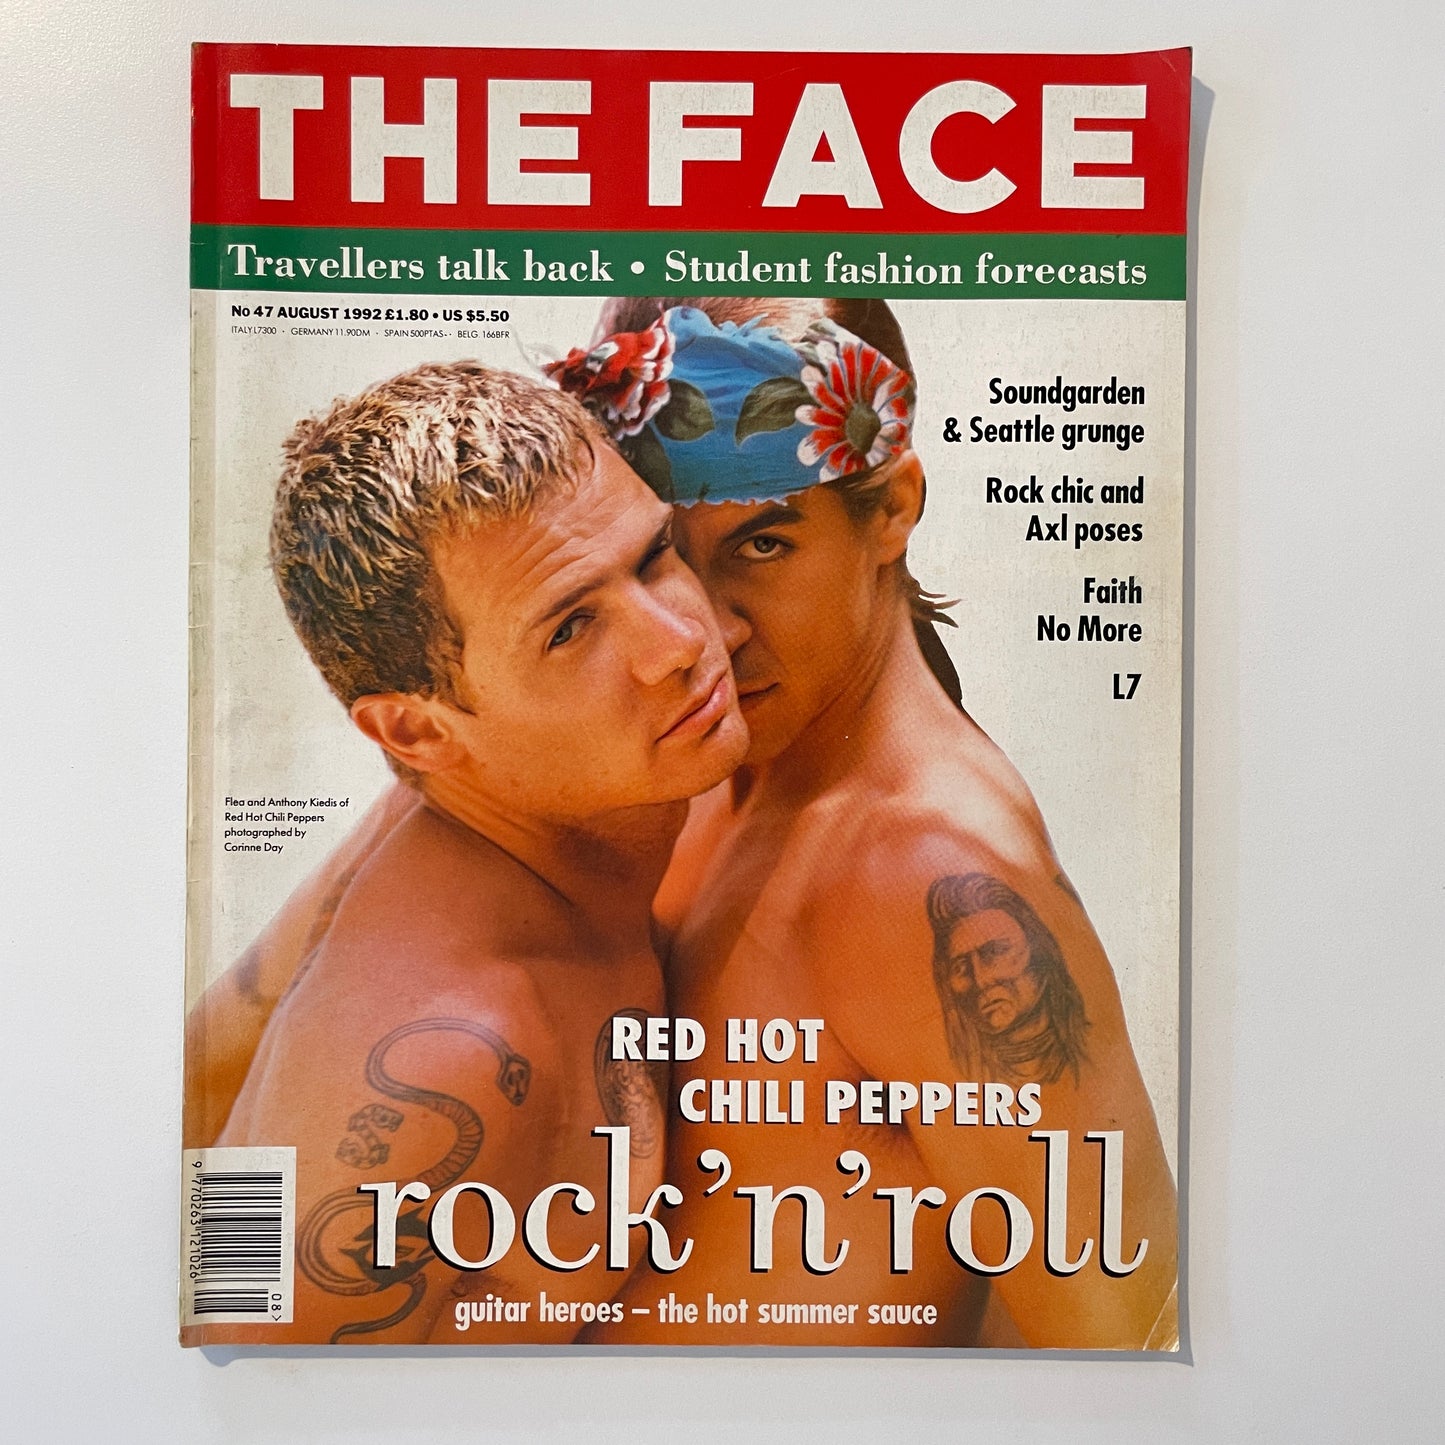 The Face No.47 - August 1992 - Chili Peppers